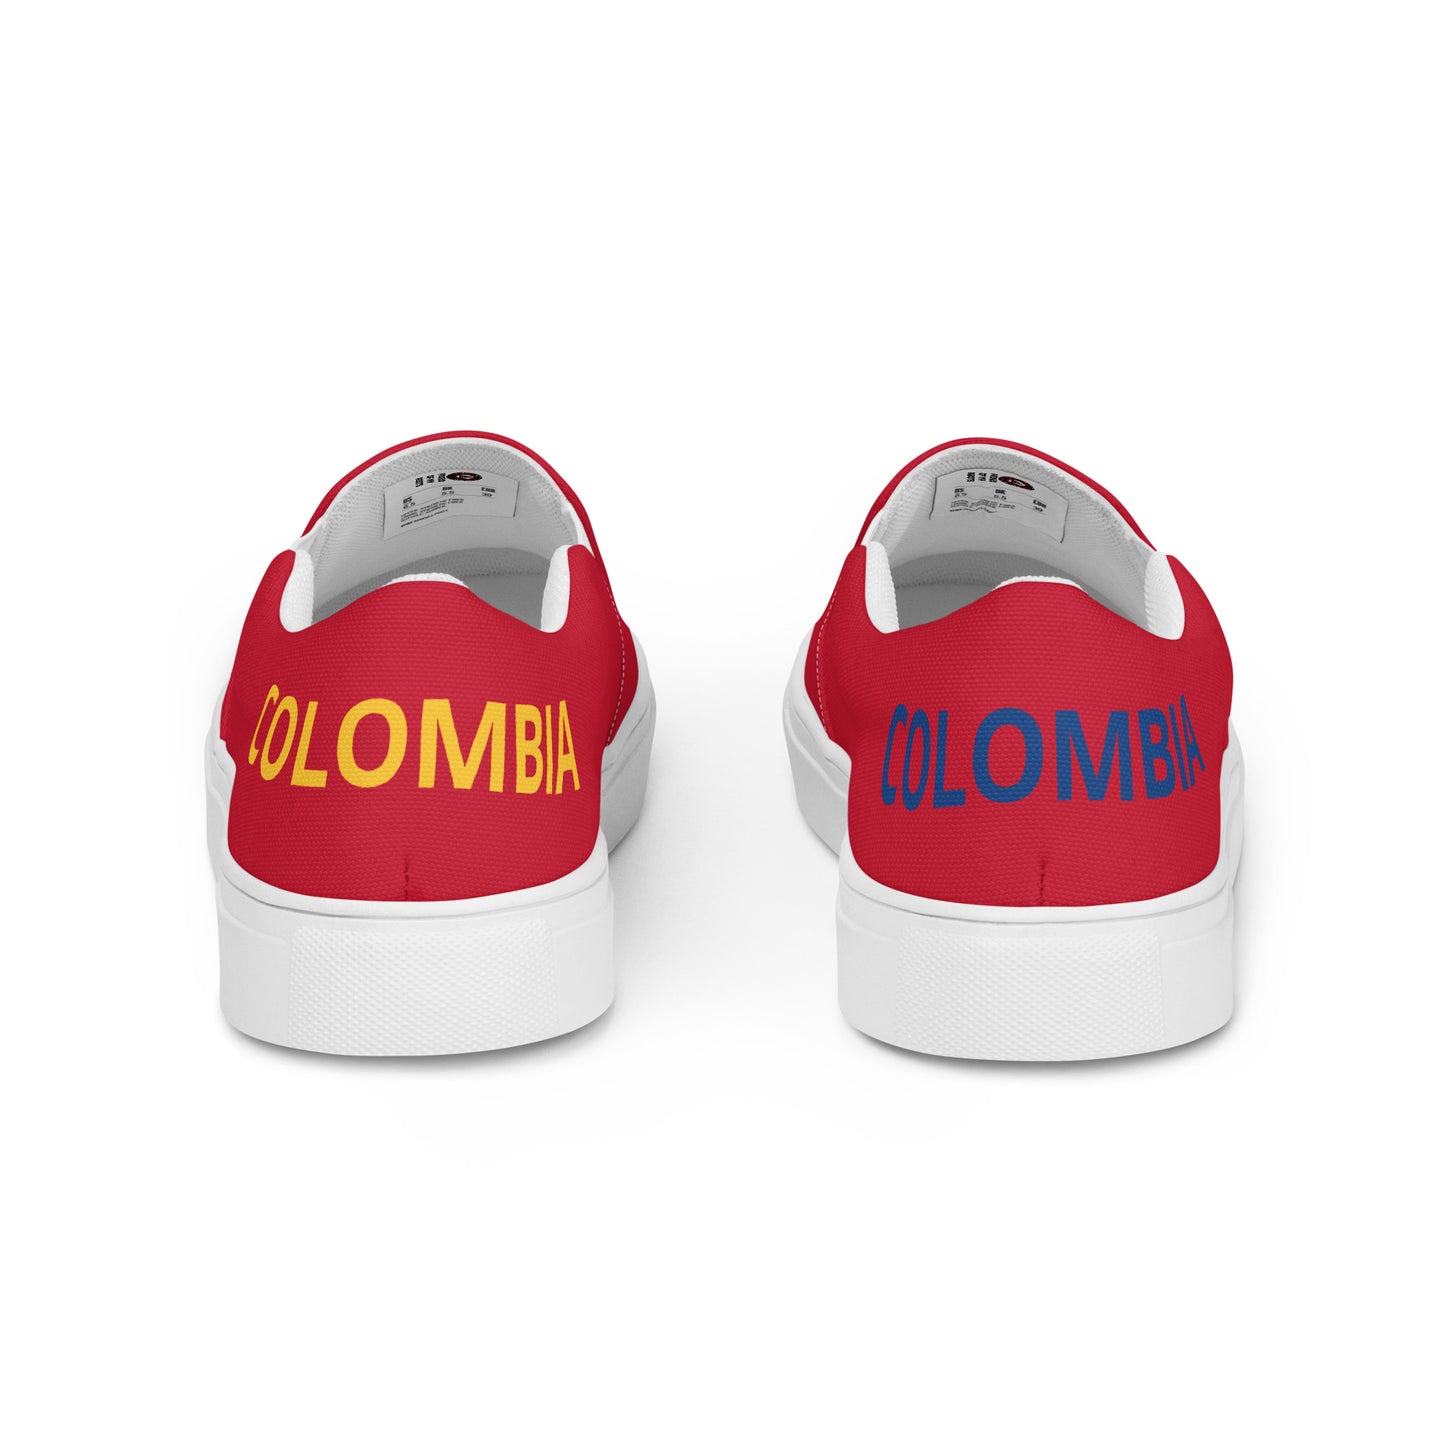 Colombia - Women - Red - Slip-on shoes